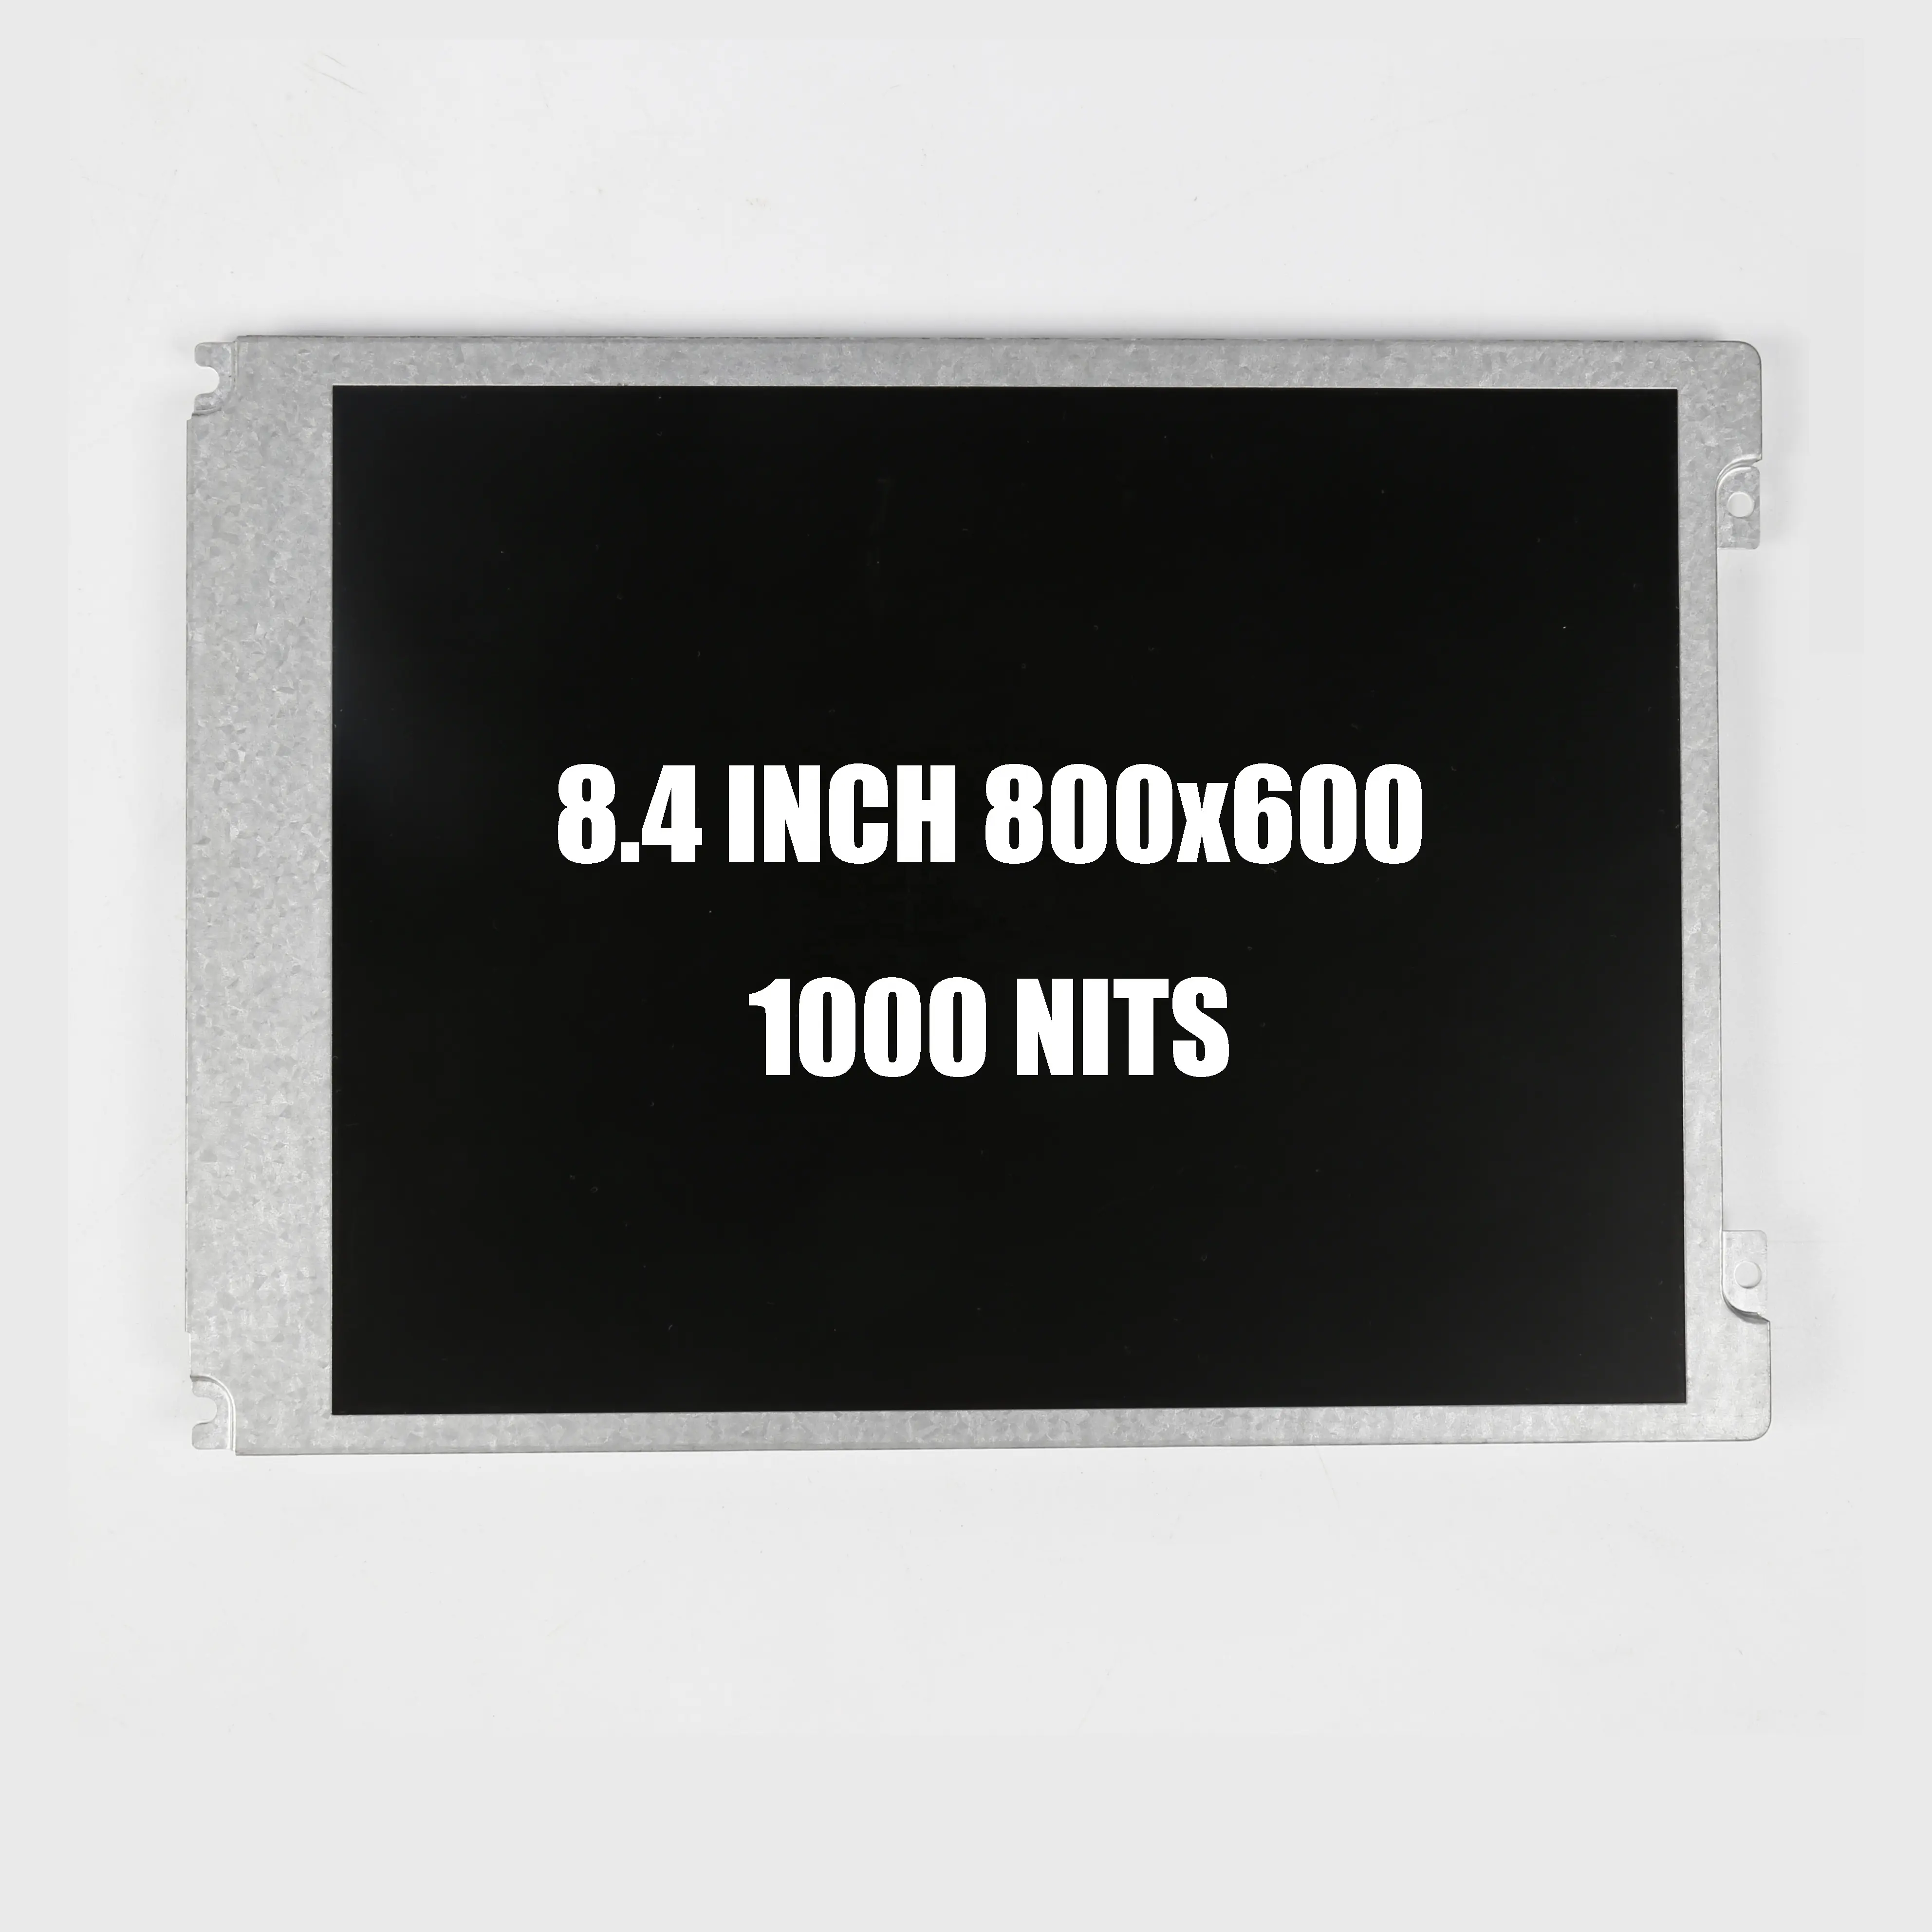 M084GNS1 R1 8.4 inch Industrial LCD Screen Sunlight Readable 1000nits LVDS interface 800x600 TFT LCD Display Module